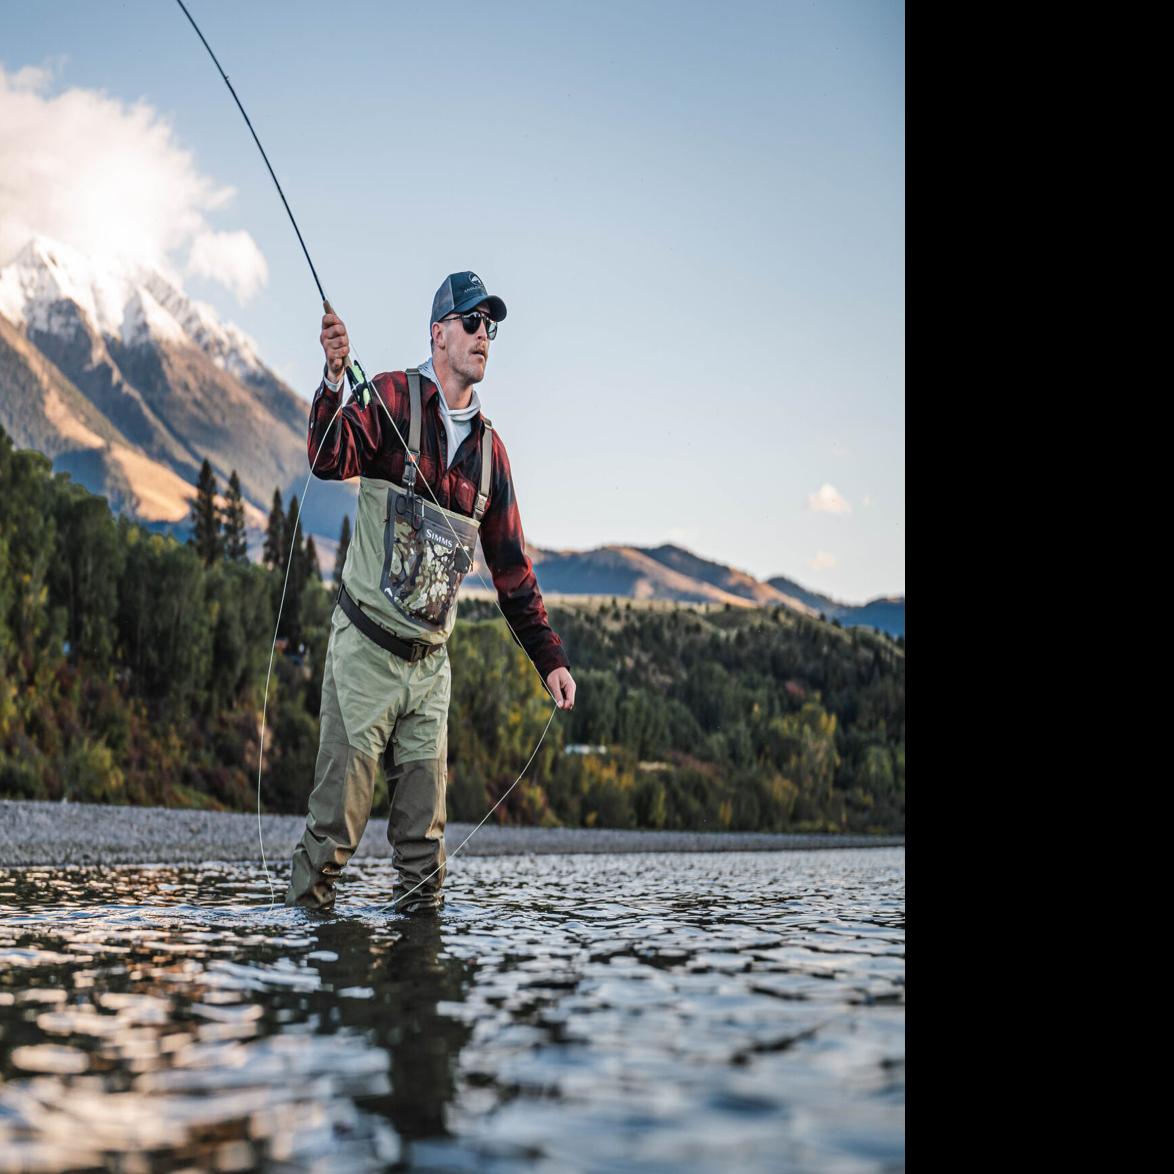 Simms launches new wader to support Yellowstone River restoration